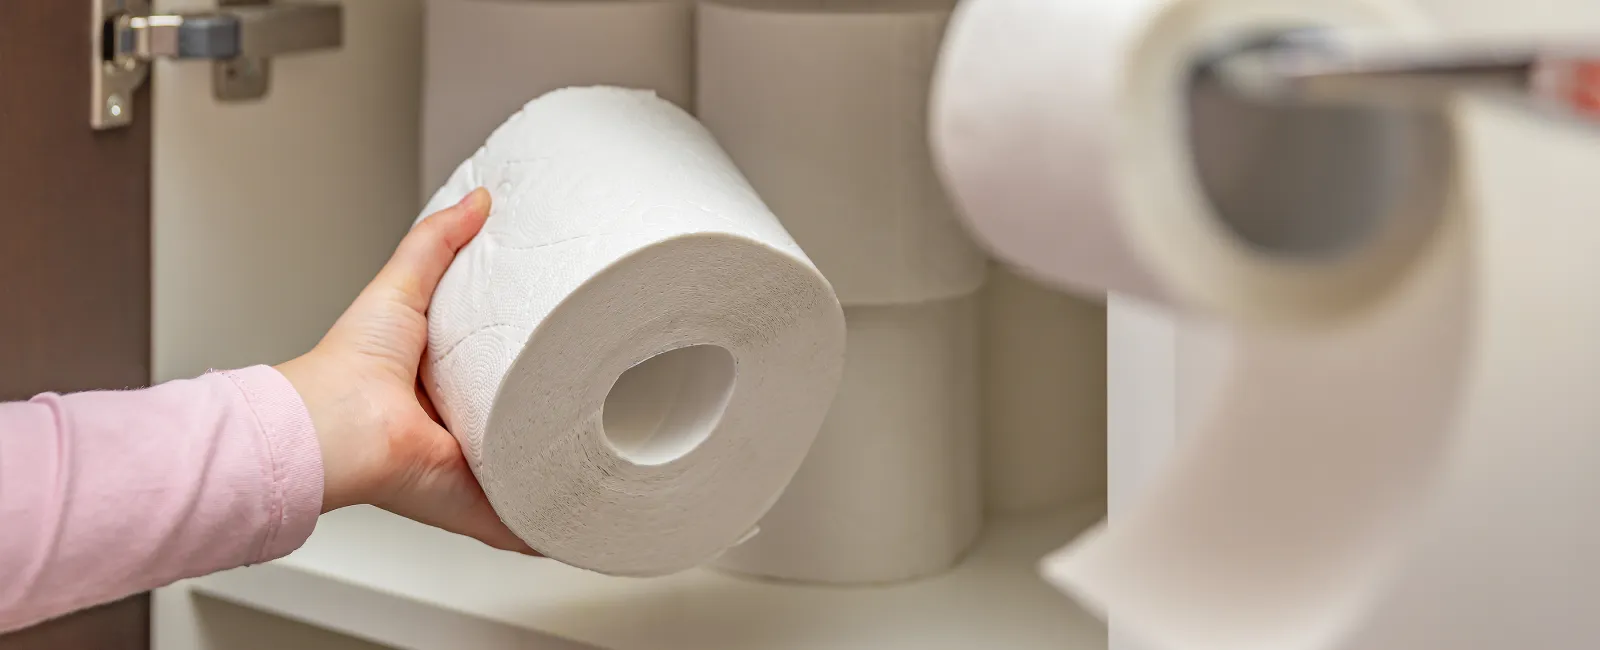 How to Choose the Right Toilet Paper for Your Septic System